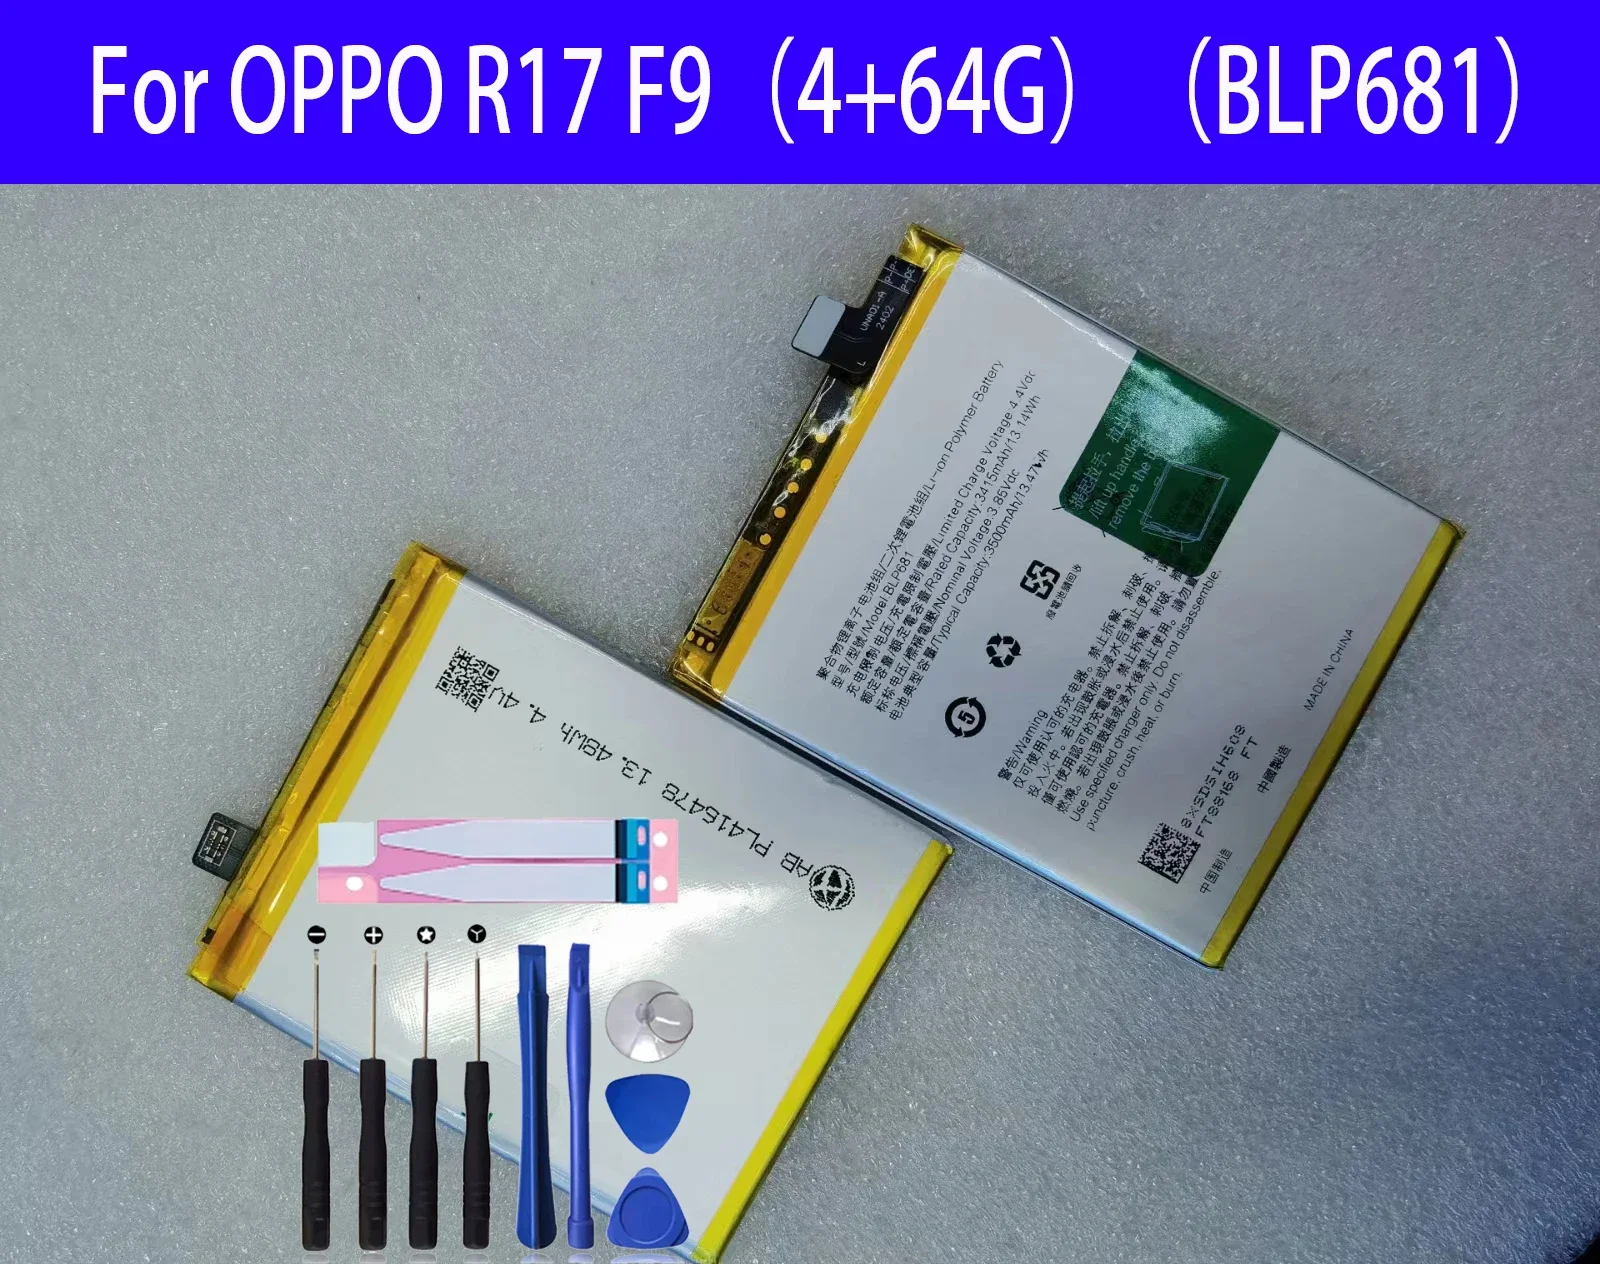 

100% Original New Replacement Battery BLP681 For OPPO R17 F9 4+64G Phone Battery+Tools